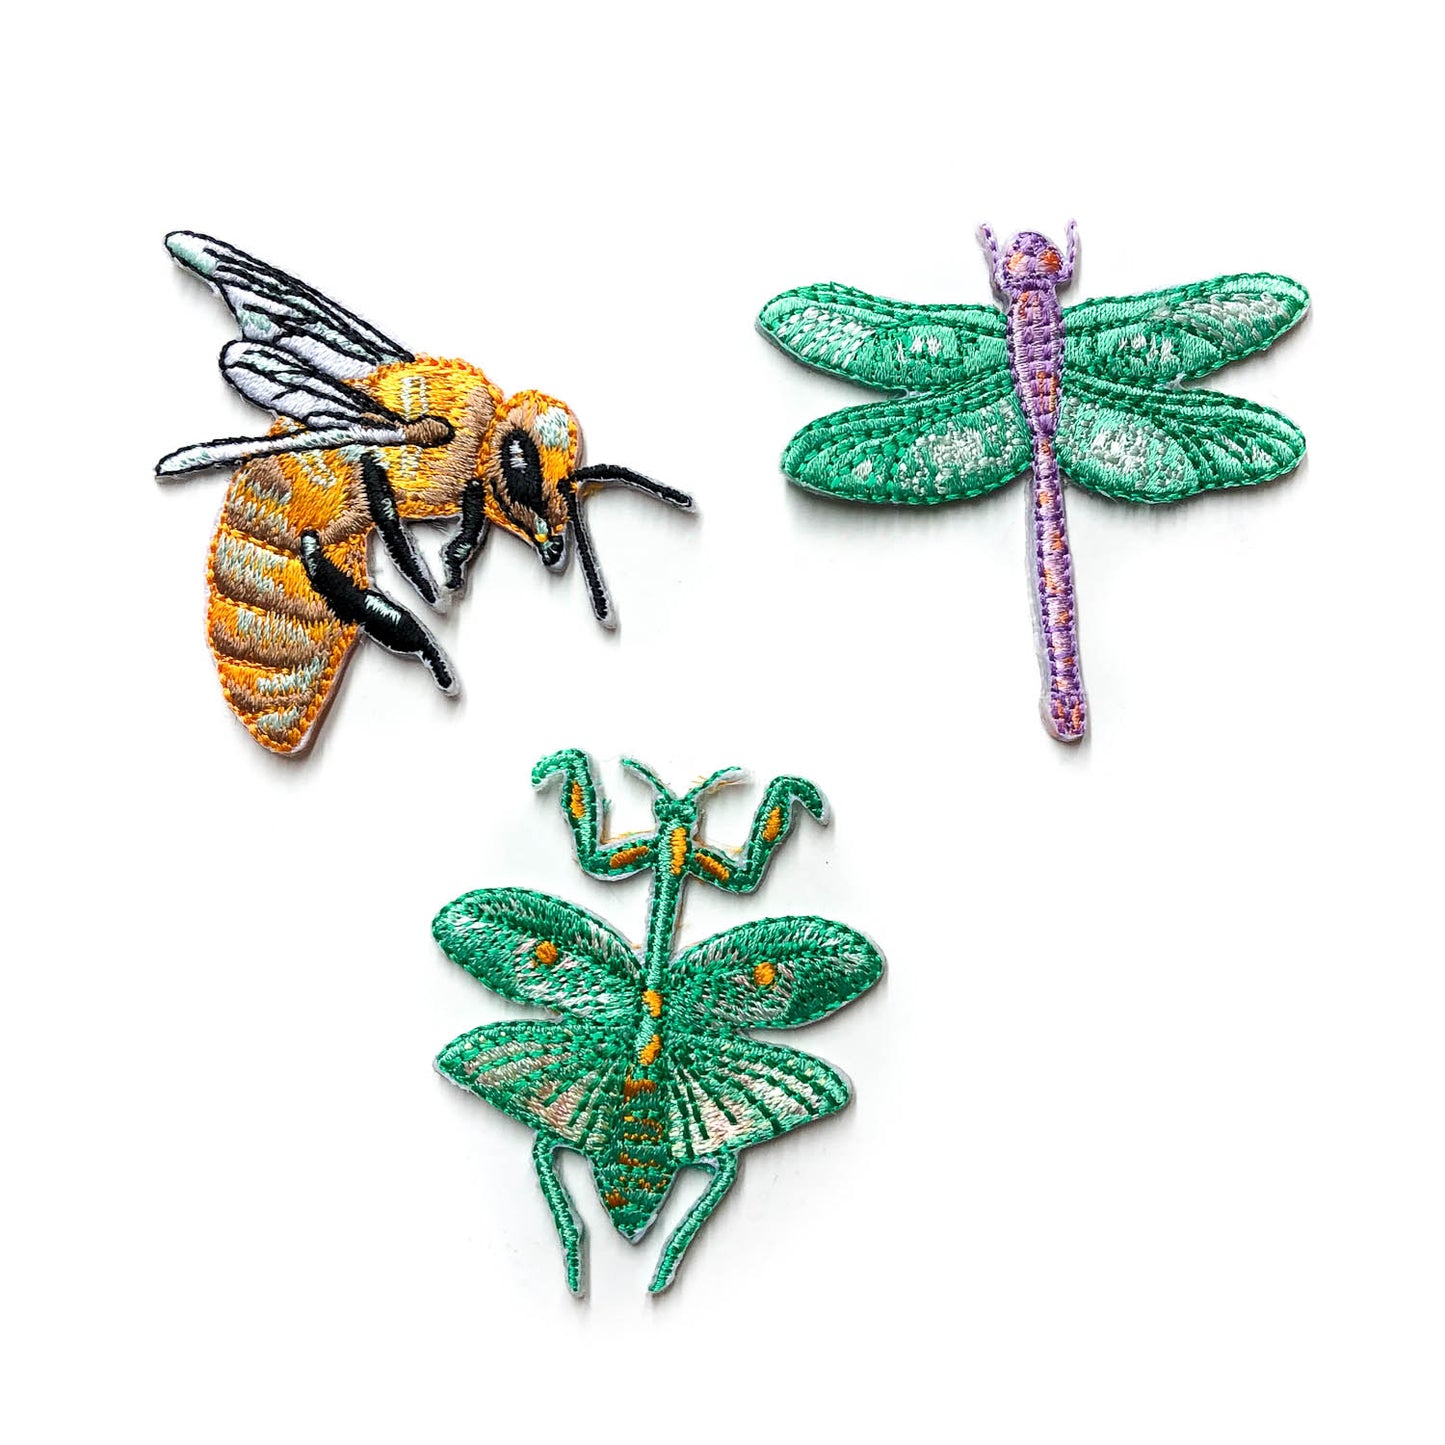 Insects Patches (3 pieces)